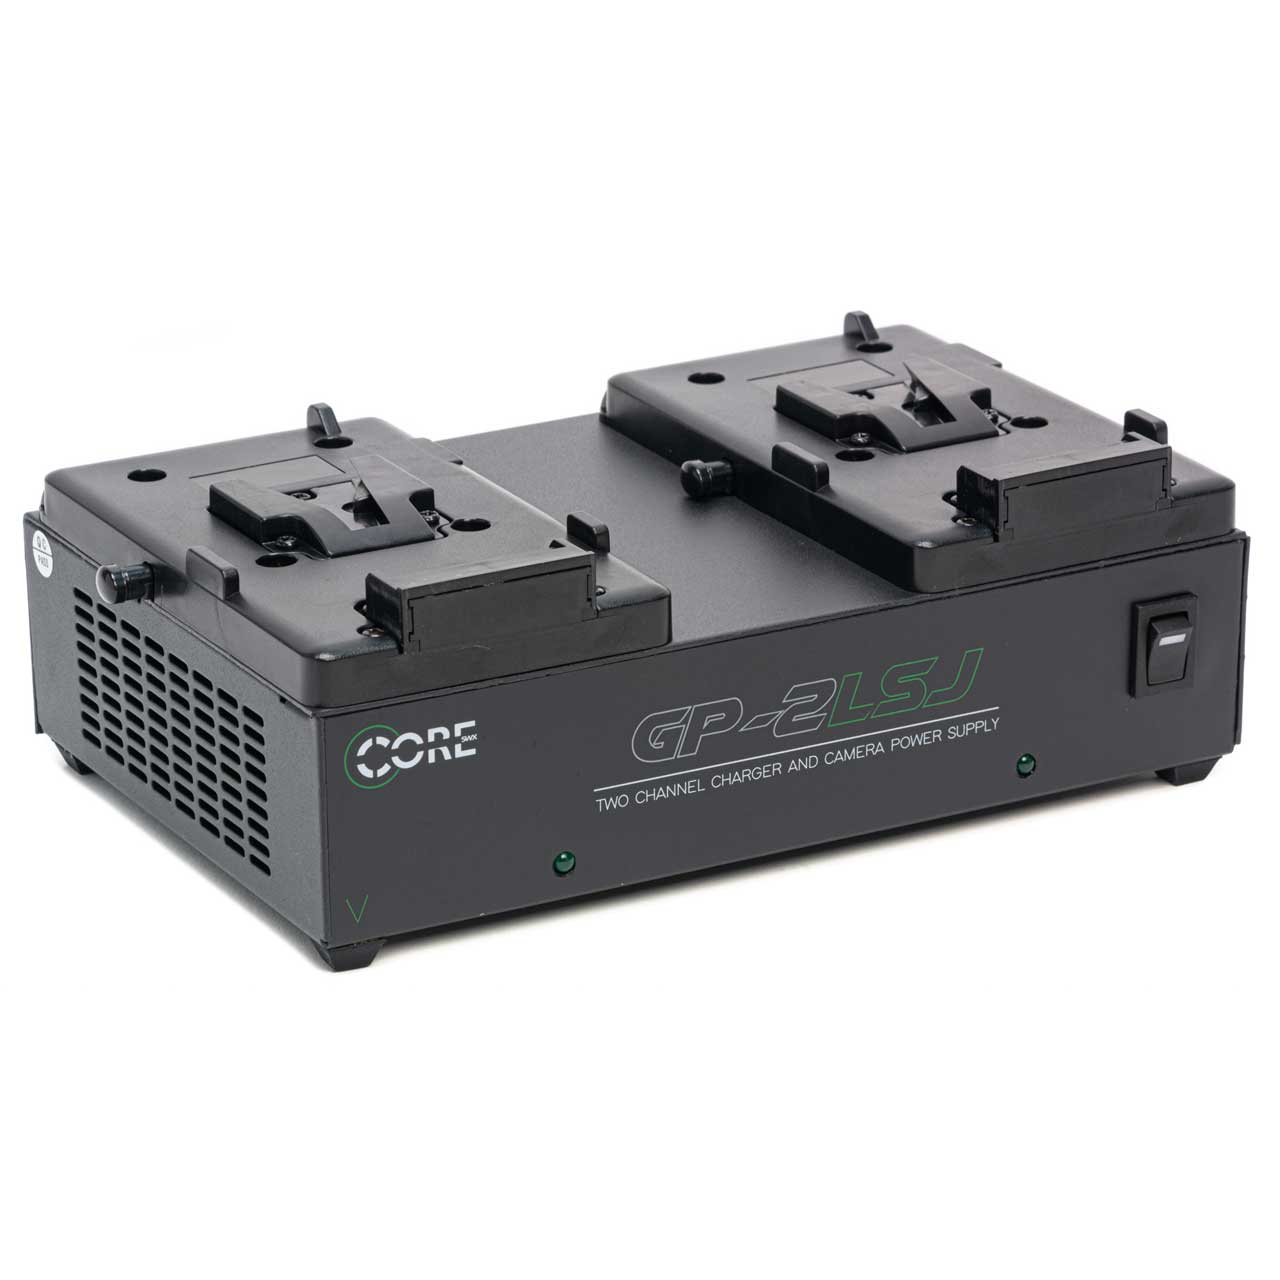 Two Channel Charger & Camera Power Supply #0135 New Switronix Core GP-2LSJ 